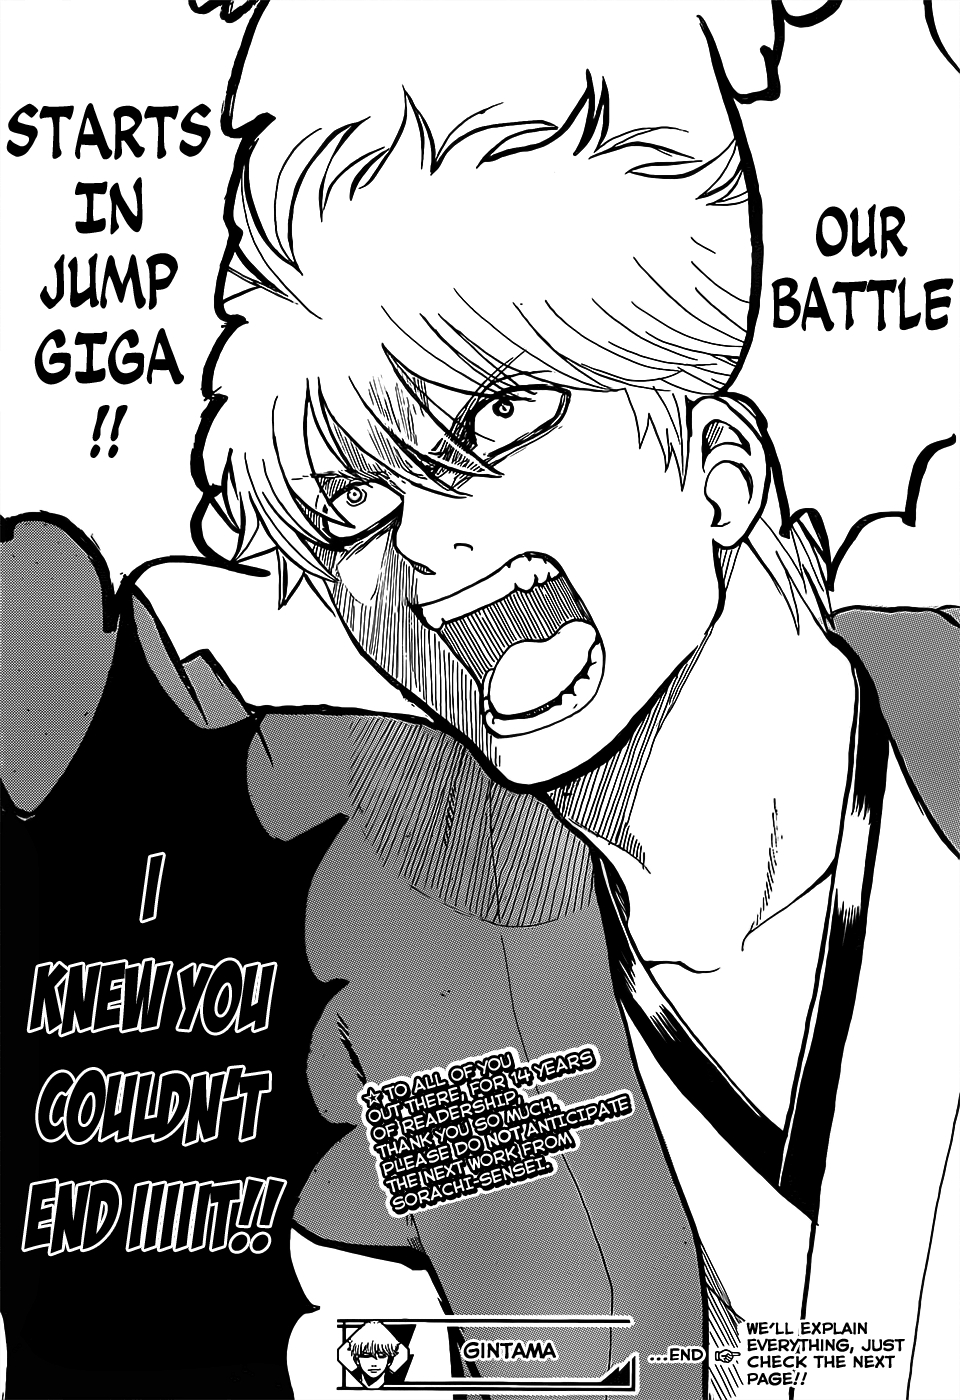 Gintama Vol. 77 Ch. 698 Beyond the Final Chapter